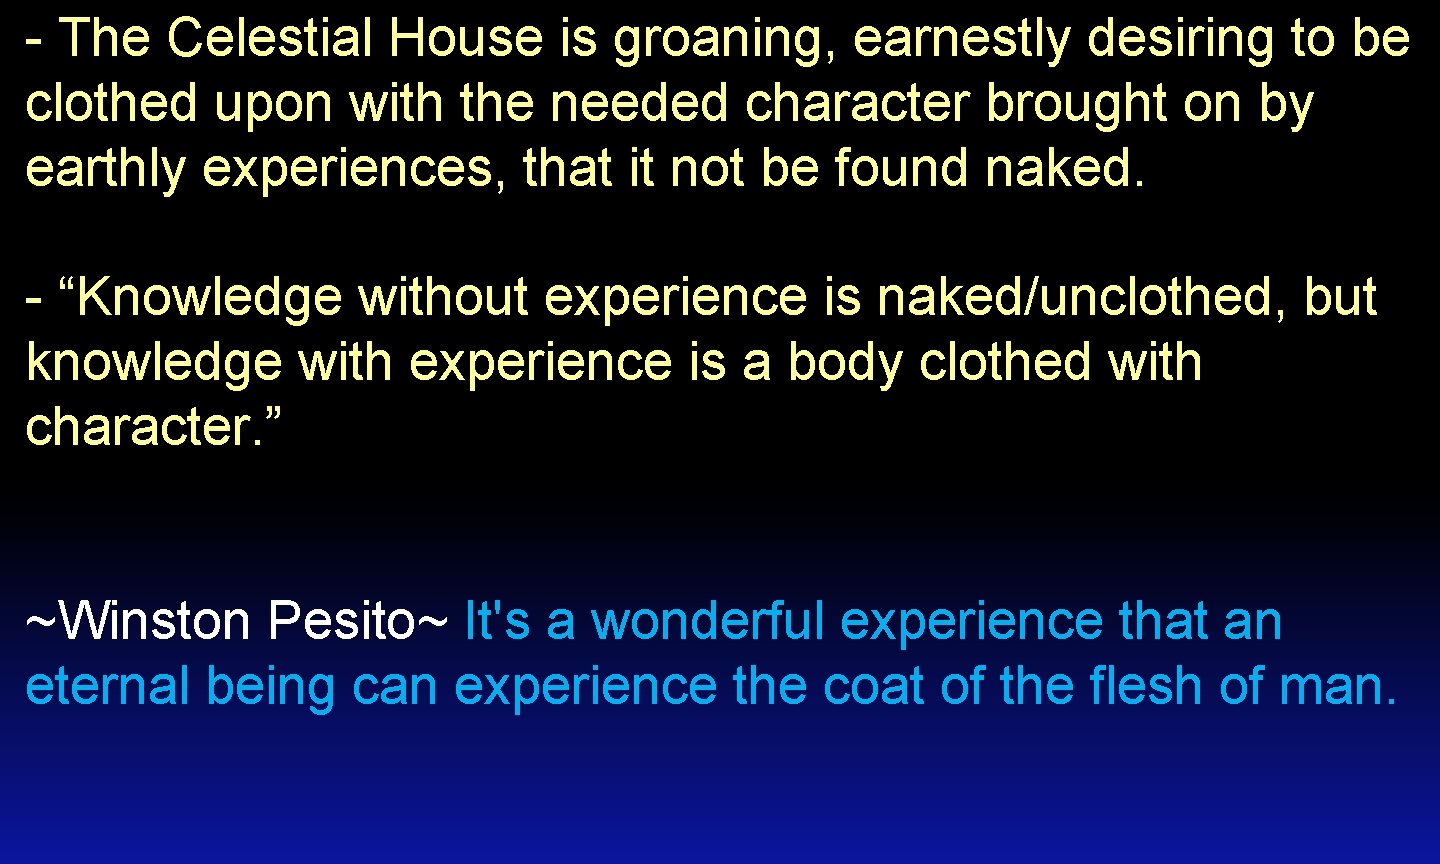 - The Celestial House is groaning, earnestly desiring to be clothed upon with the